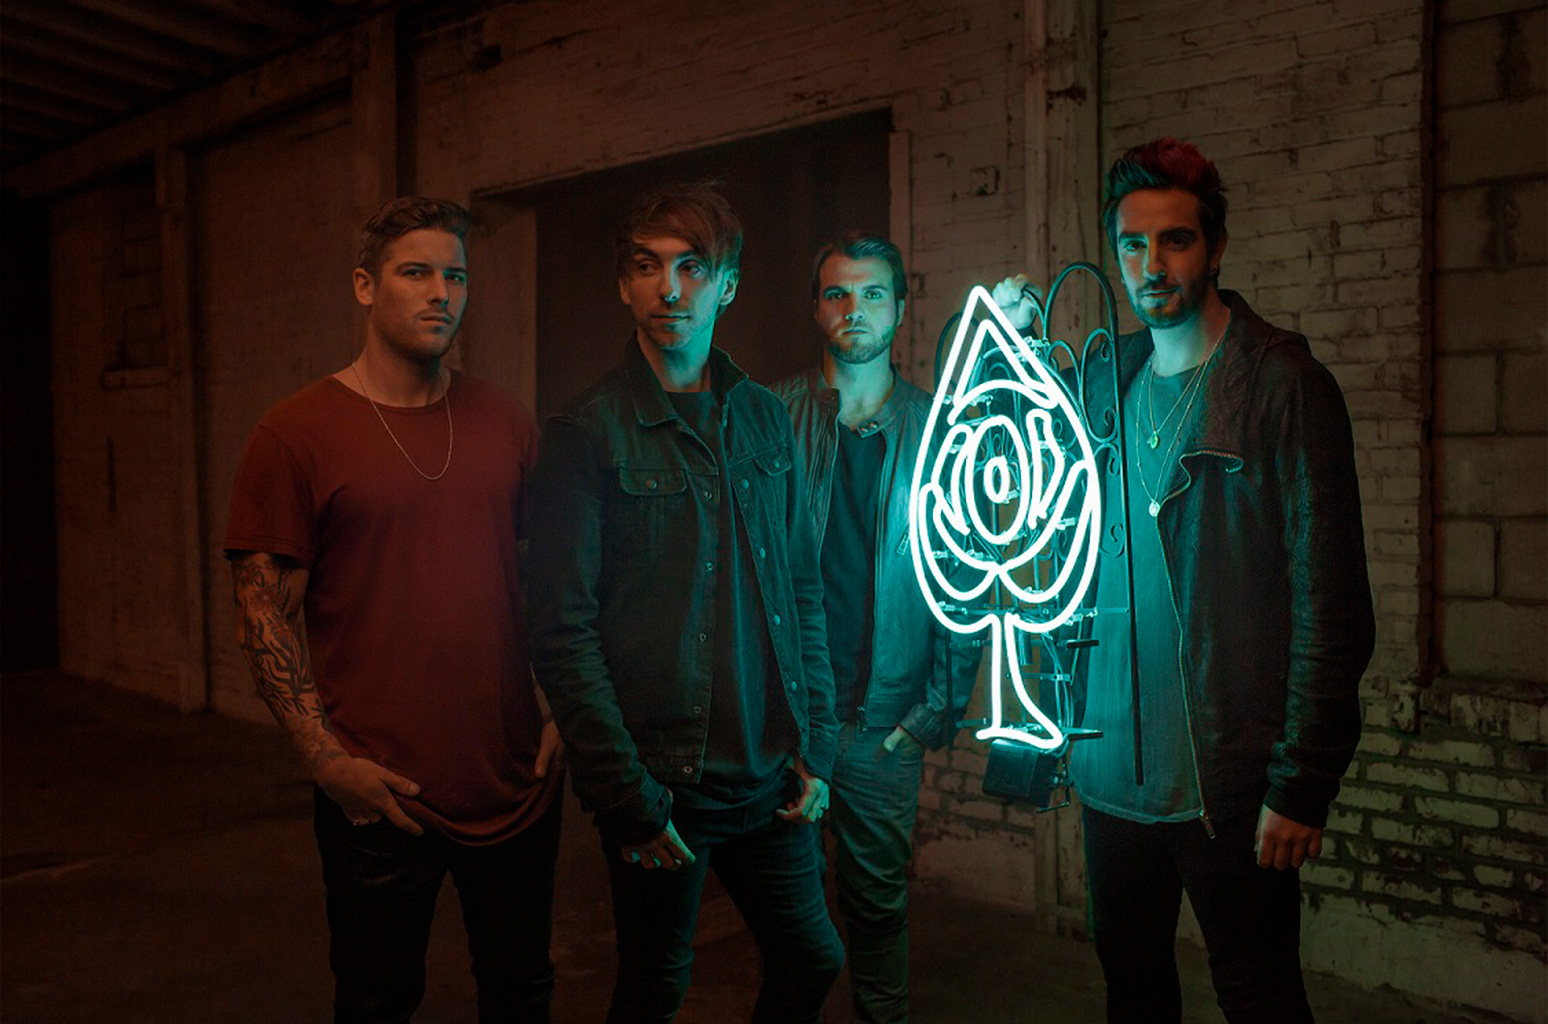 All Time Low: “This is our first time making an album in secret!”